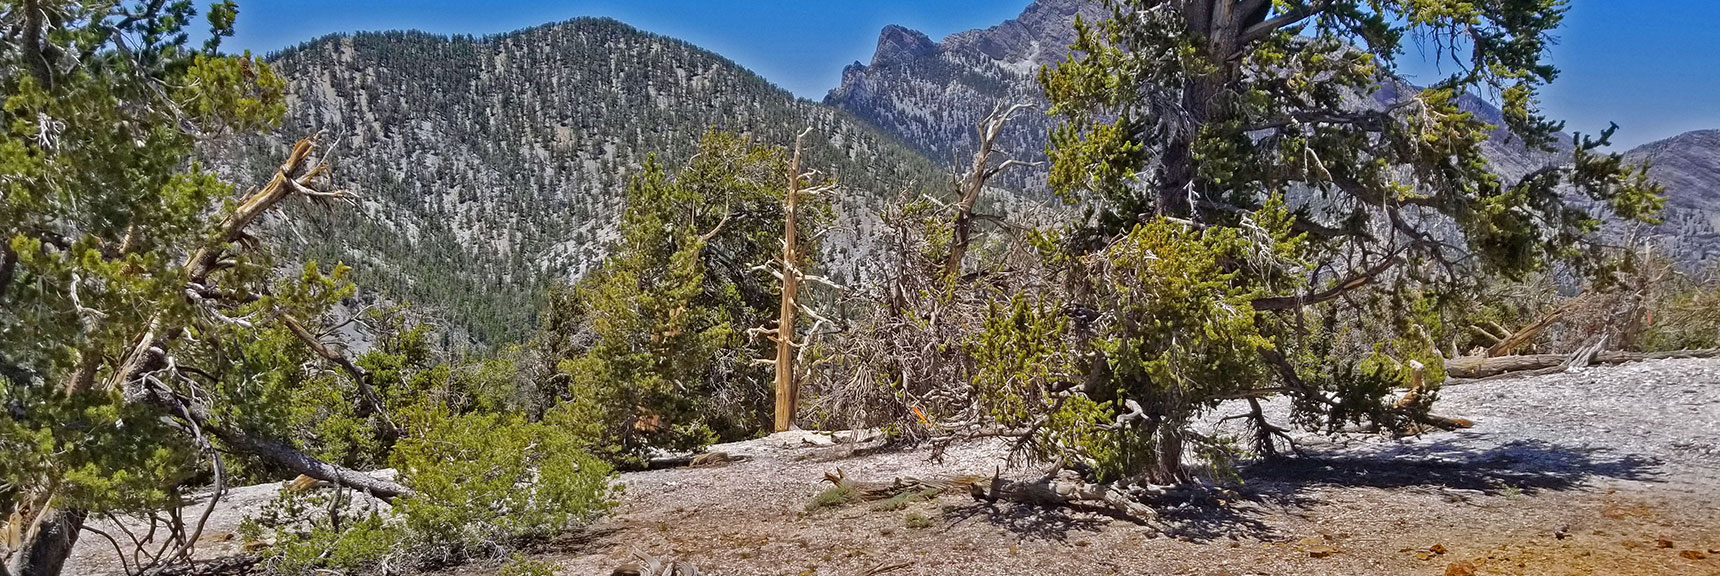 Western Descent Ridge from The Sisters South. This is the Main Trail. | The Sisters South | Lee Canyon | Mt Charleston Wilderness | Spring Mountains, Nevada